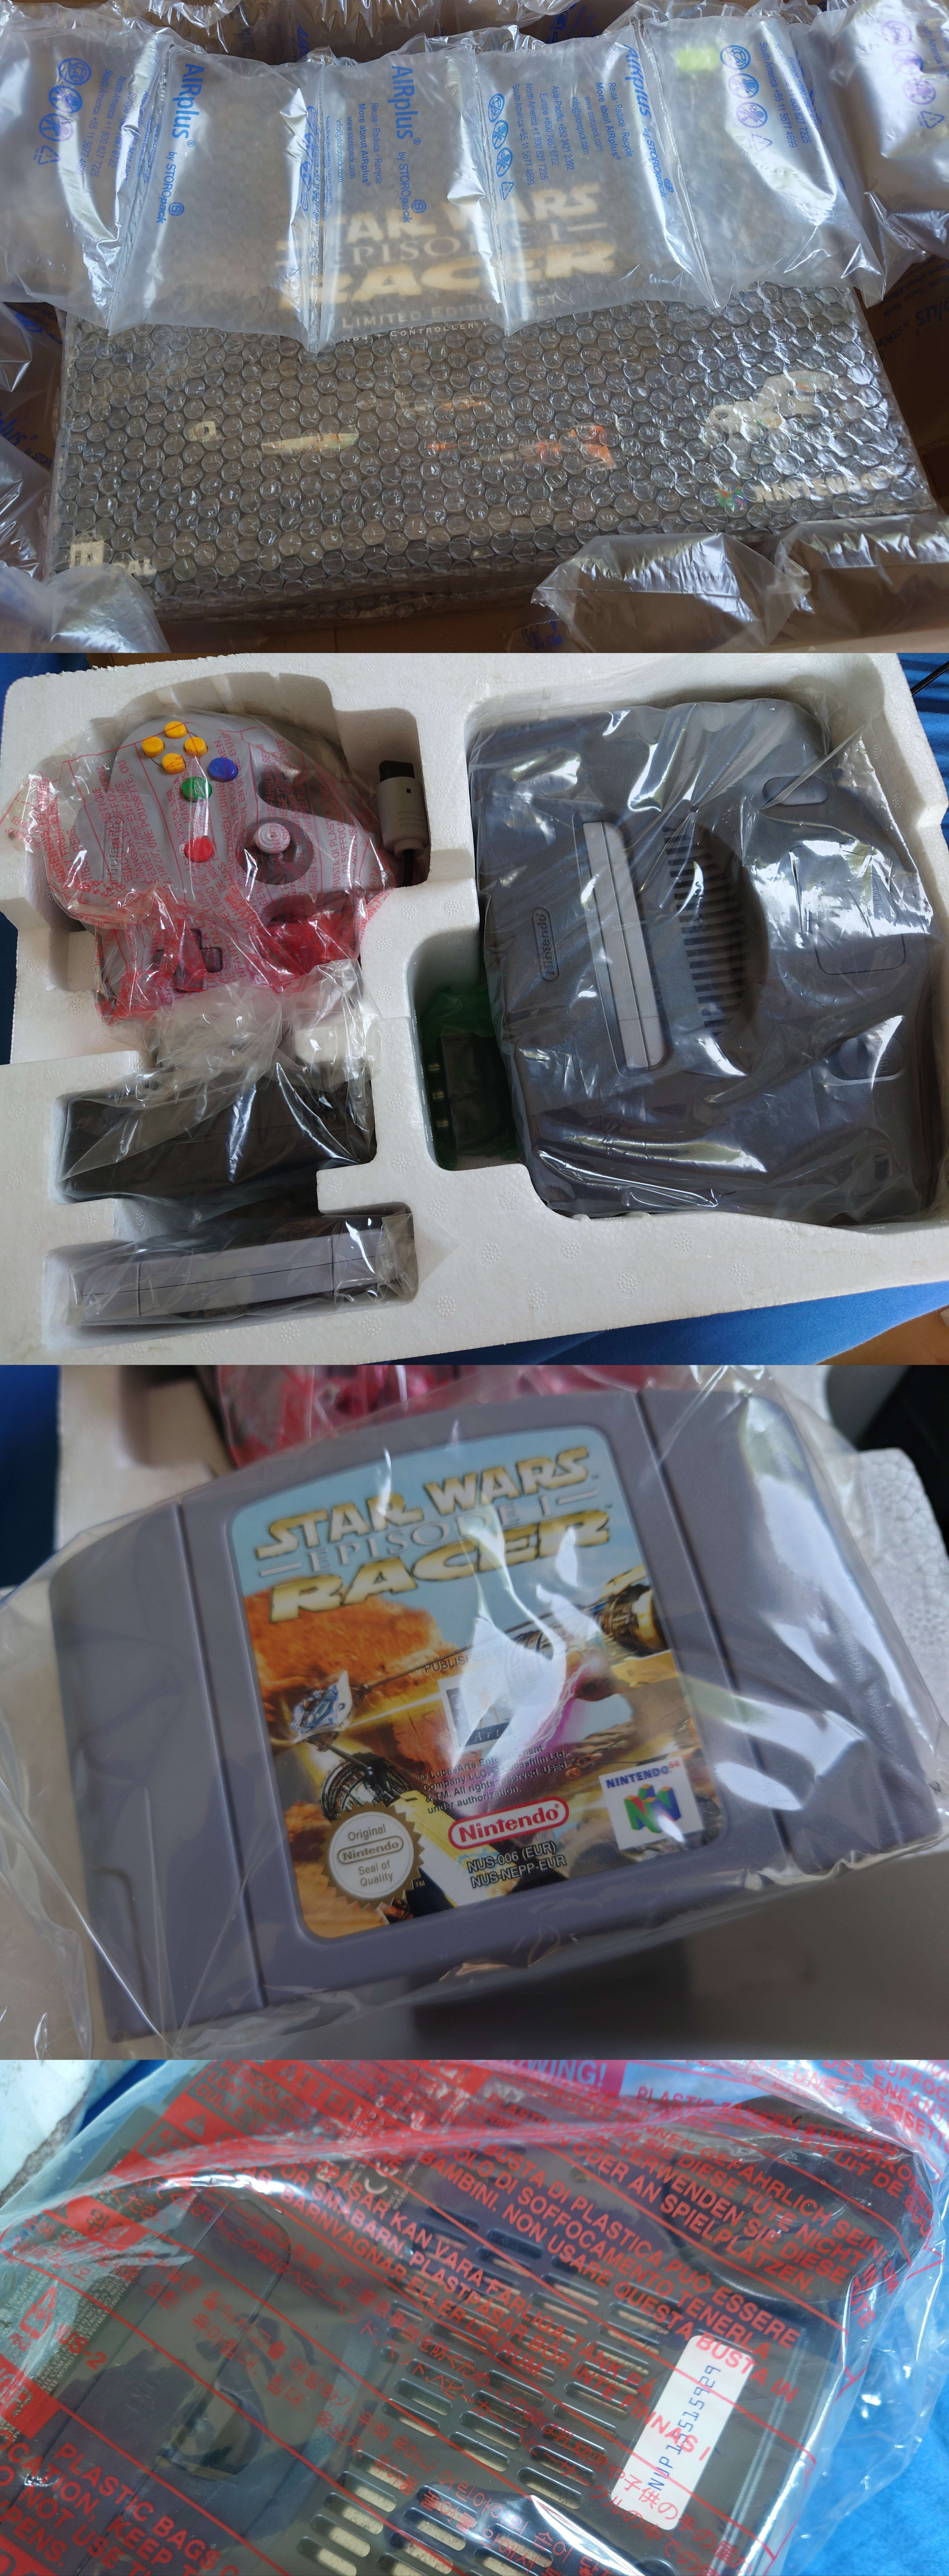 image showing [OC] My new in box Star Wars Episode 1 racer Nintendo 64 console pack!